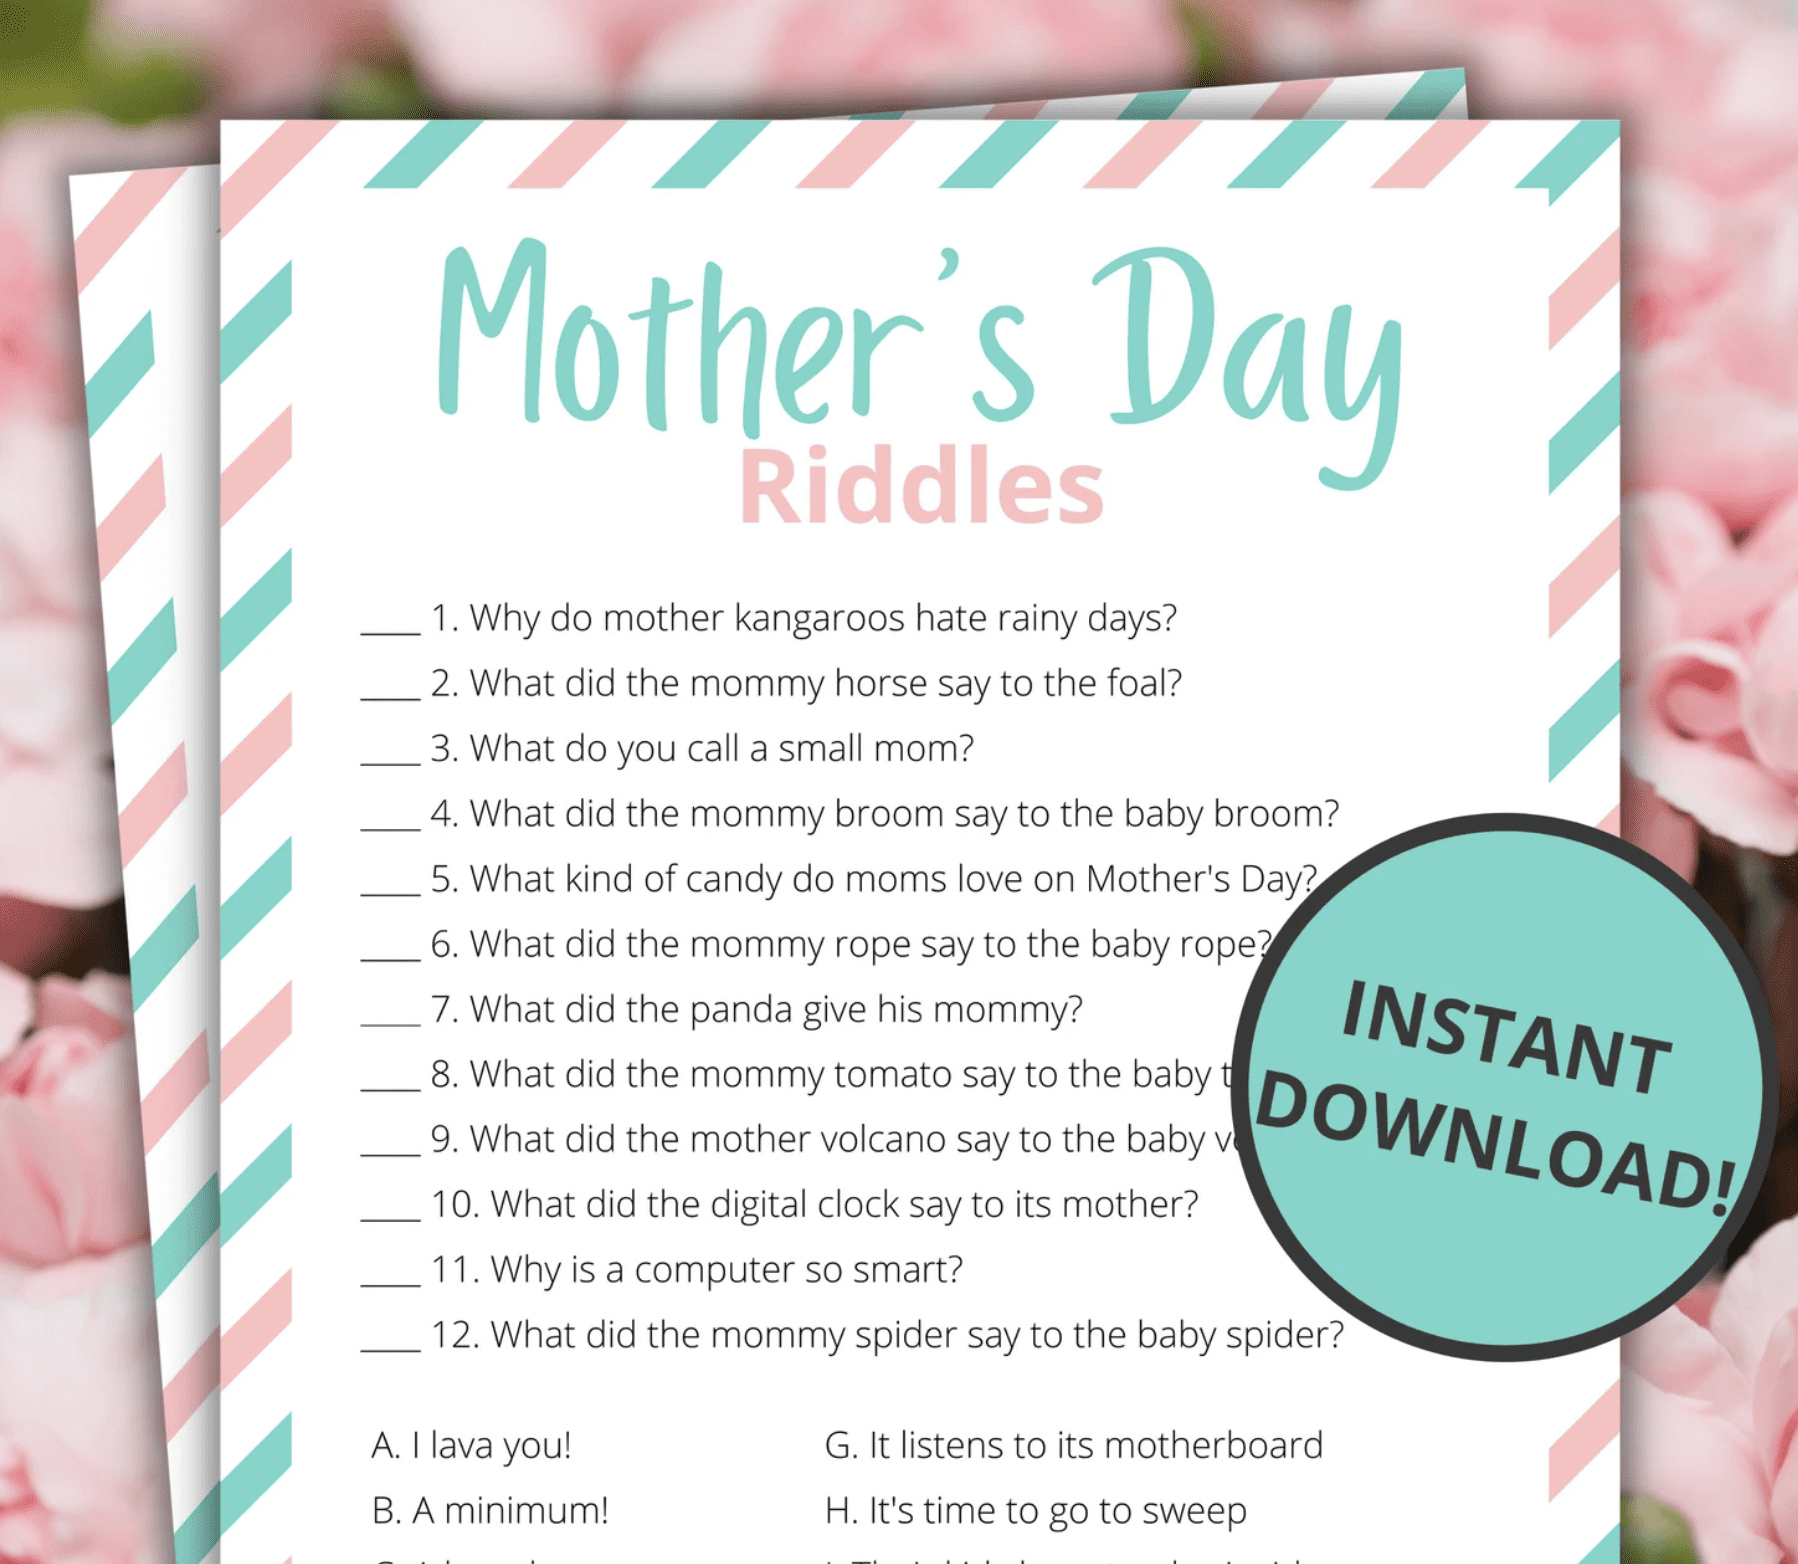 Mother’s Day Riddles